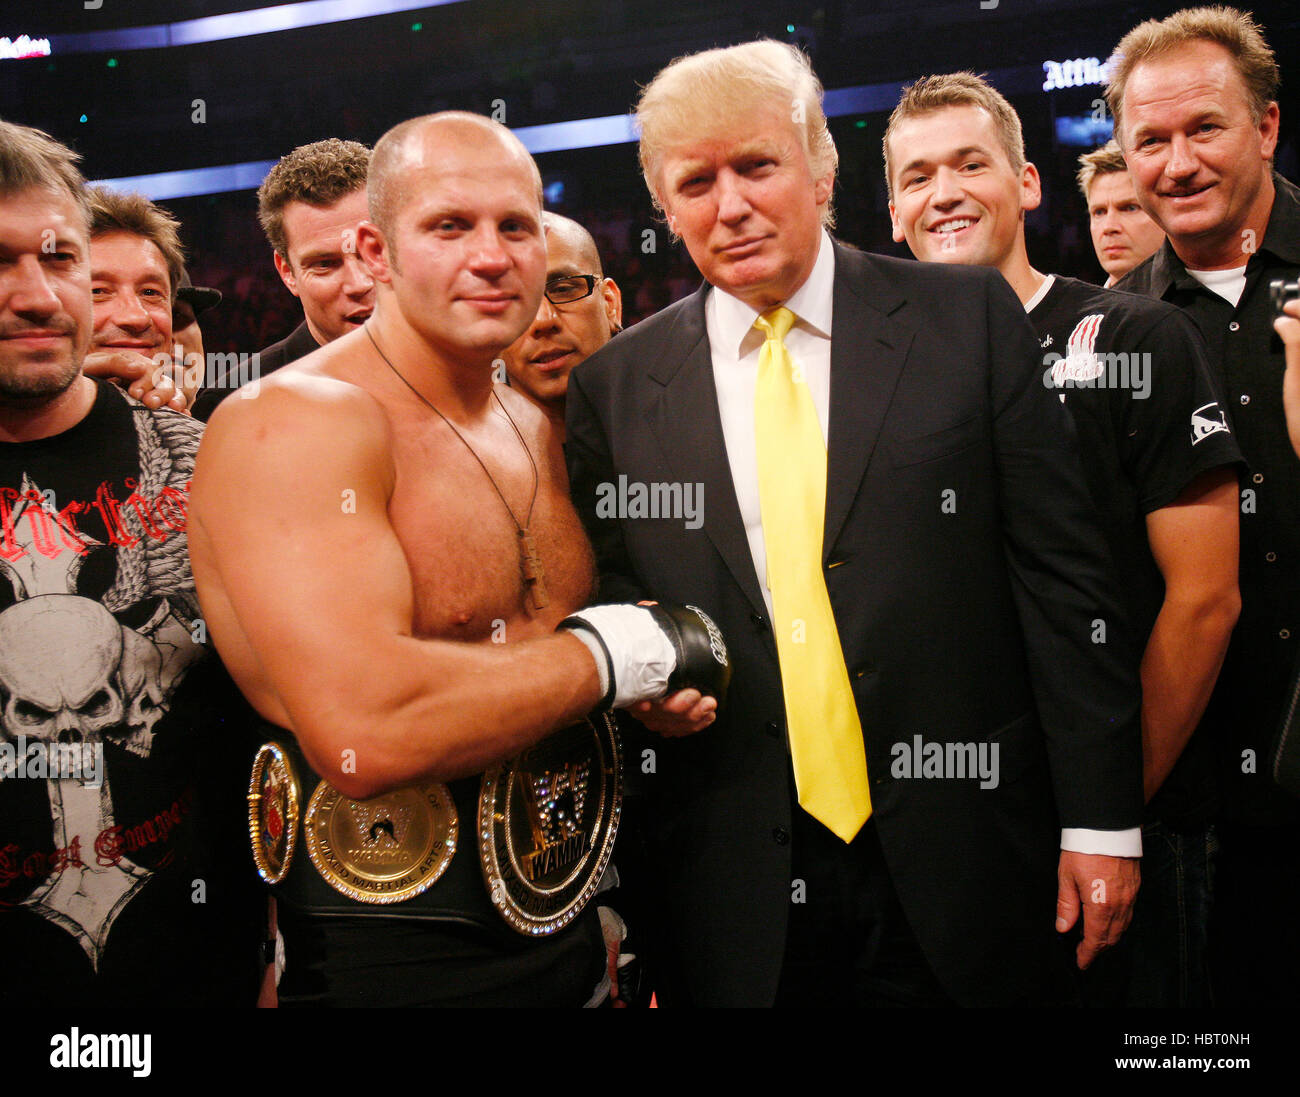 Fedor Emelianenko poses with Donald Trump in the ring after defeating Tim Sylvia at Affliction's 'Banned', a mixed martial arts fight at the Honda Center on July 19, 2008 in Anaheim, California. Francis Specker Stock Photo